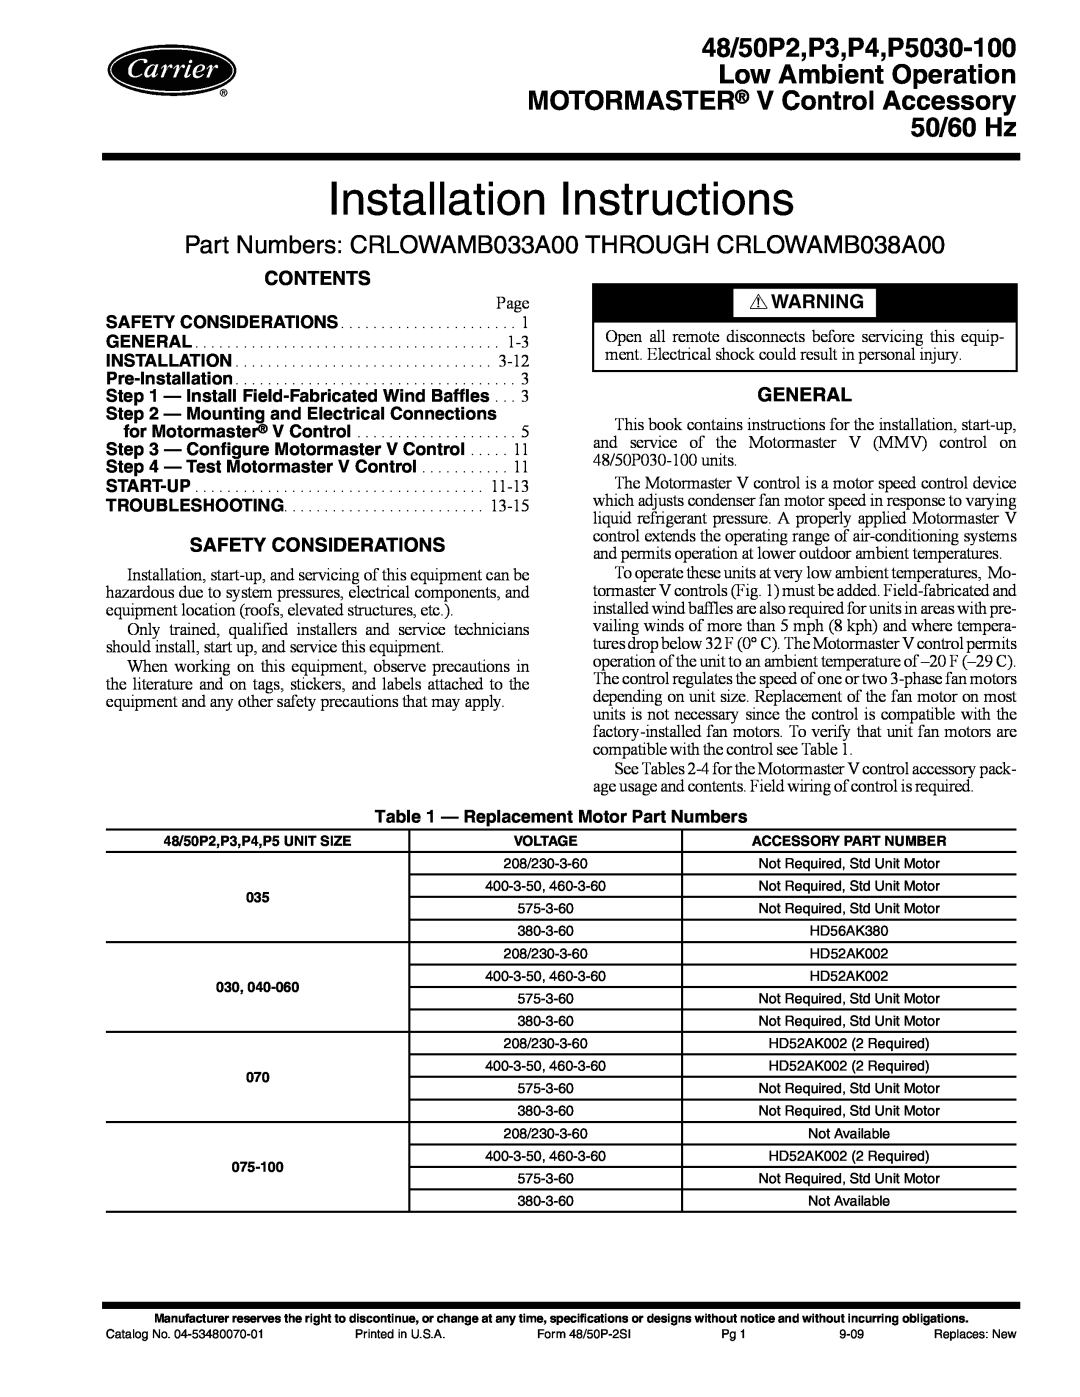 Carrier 48/50P2, 48/50P4 installation instructions Contents, Safety Considerations, General, Installation Instructions 